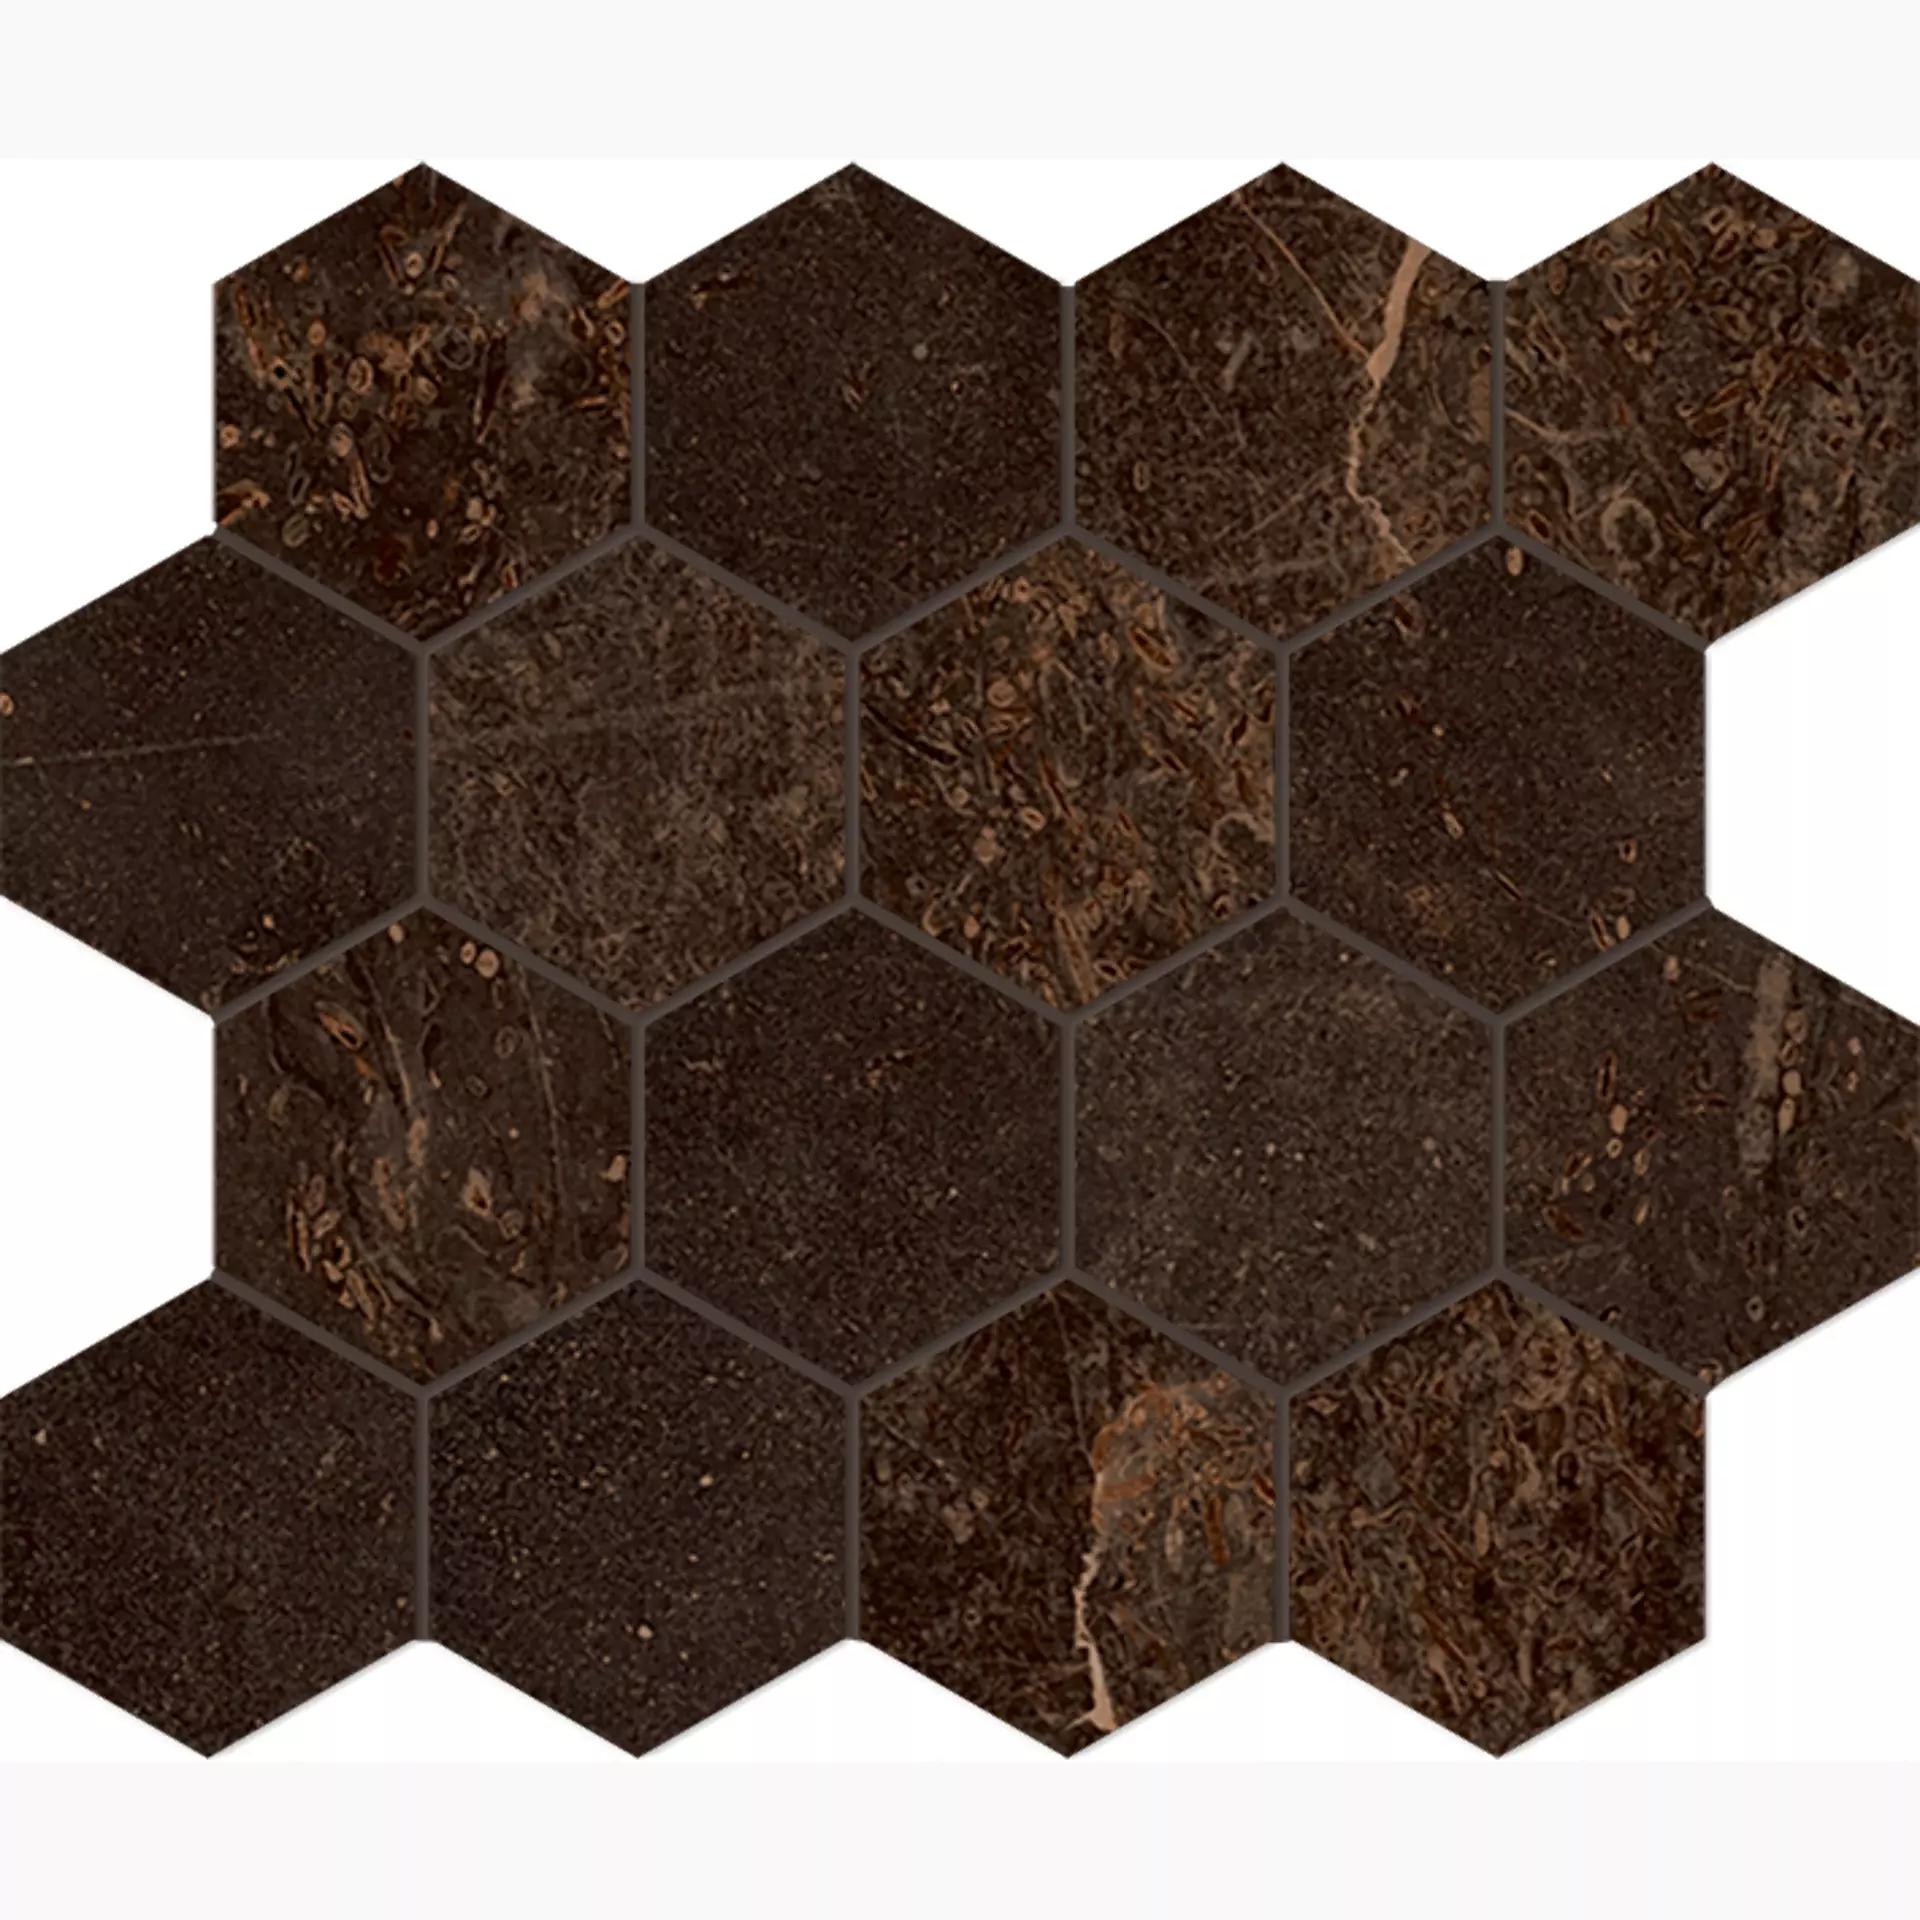 Fondovalle Planeto Jupiter Natural Mosaic Hexagon PNT032A 26x30cm rectified 8,5mm